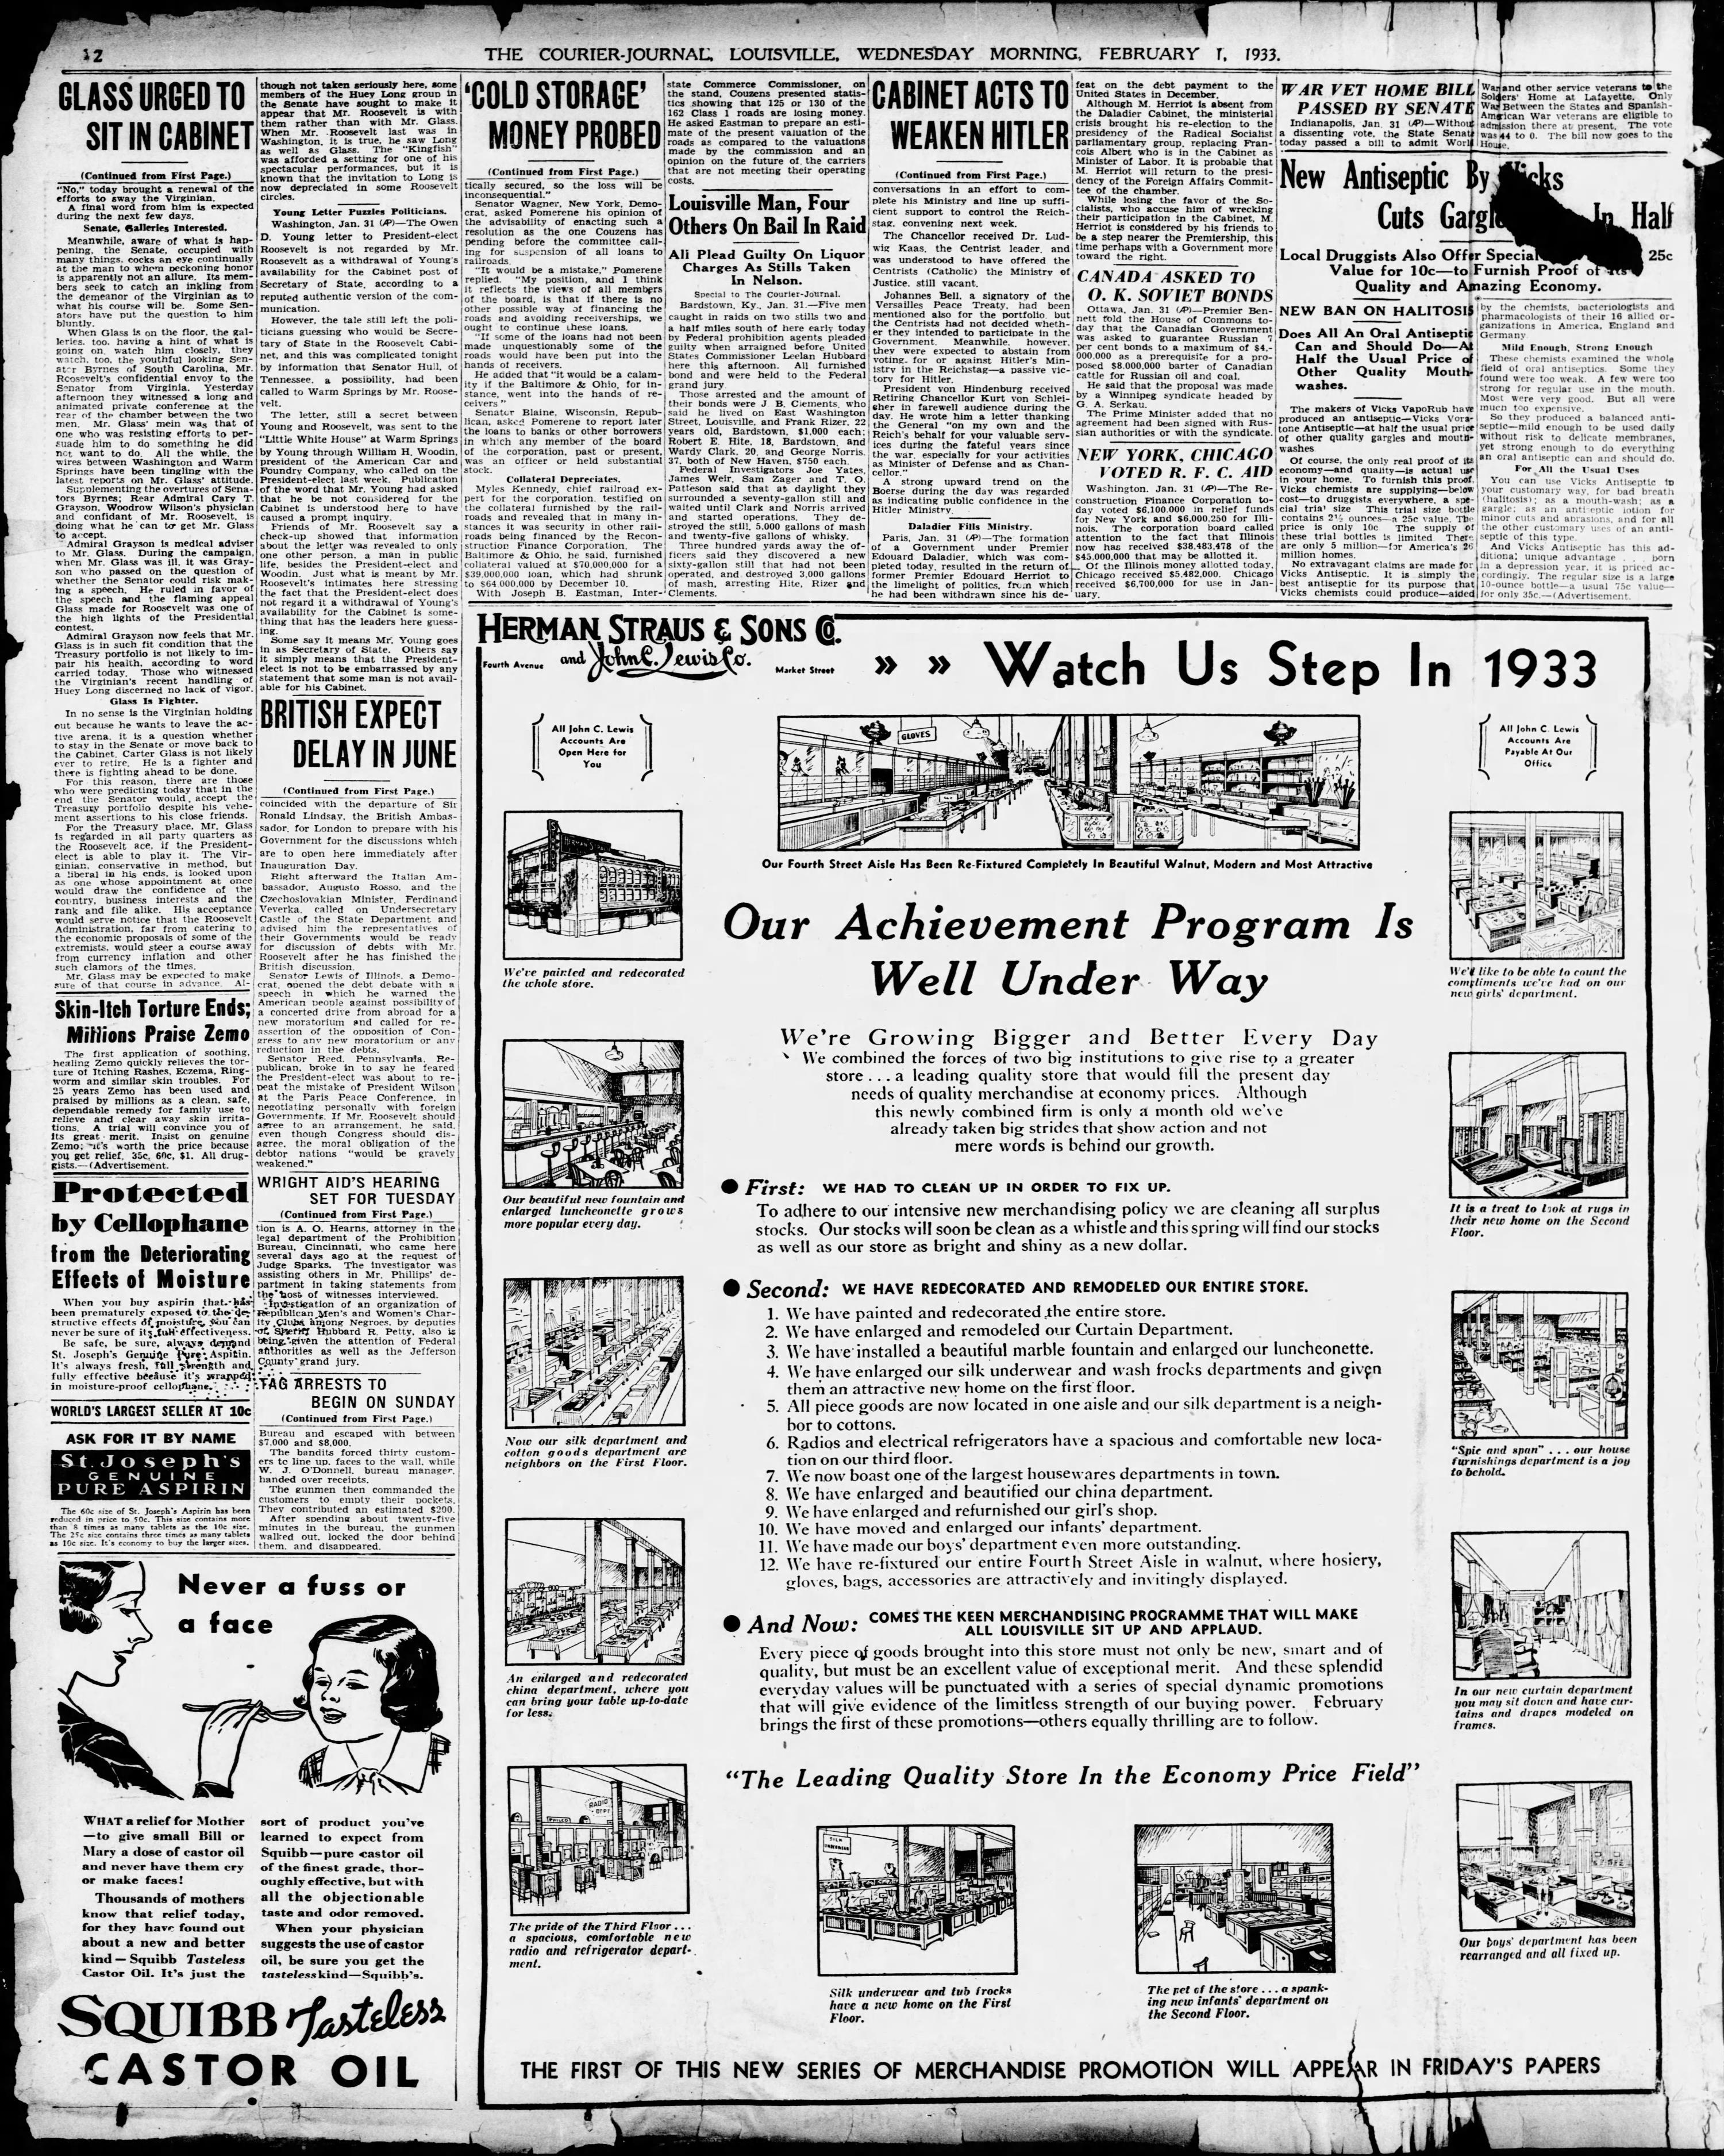 The_Courier_Journal_Wed__Feb_1__1933_2.jpg